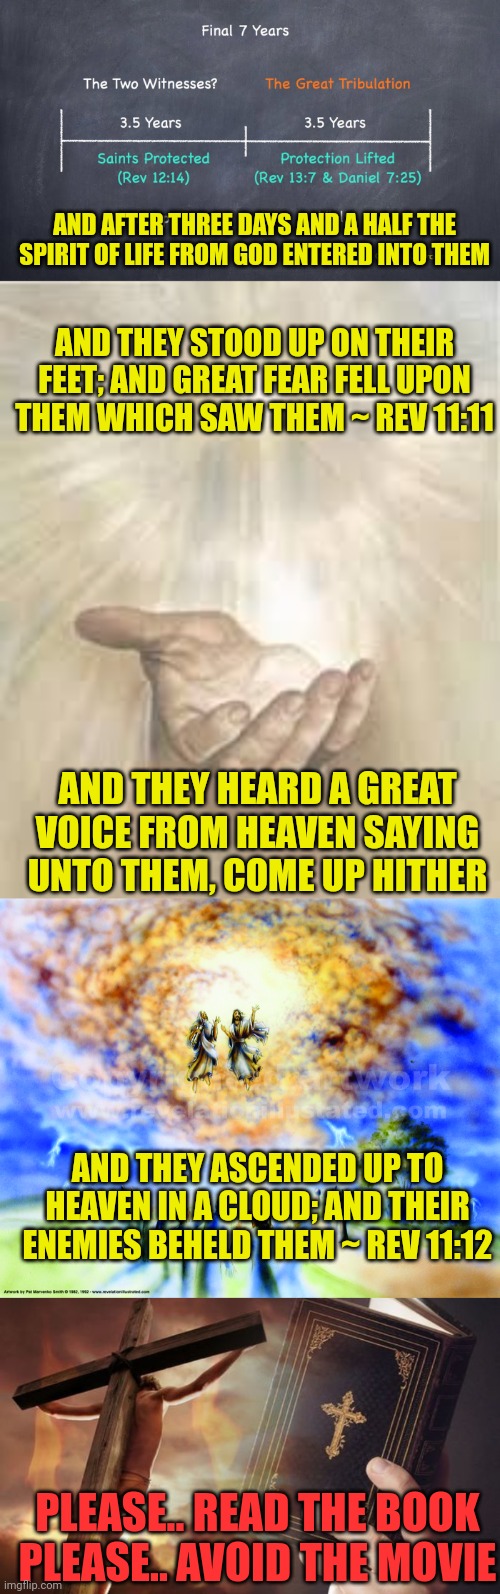 AND AFTER THREE DAYS AND A HALF THE SPIRIT OF LIFE FROM GOD ENTERED INTO THEM; AND THEY STOOD UP ON THEIR FEET; AND GREAT FEAR FELL UPON THEM WHICH SAW THEM ~ REV 11:11; AND THEY HEARD A GREAT VOICE FROM HEAVEN SAYING UNTO THEM, COME UP HITHER; AND THEY ASCENDED UP TO HEAVEN IN A CLOUD; AND THEIR ENEMIES BEHELD THEM ~ REV 11:12; PLEASE.. READ THE BOOK
PLEASE.. AVOID THE MOVIE | image tagged in two witnesses,jesus beckoning,two witnesses ascending,jesus cross bible | made w/ Imgflip meme maker